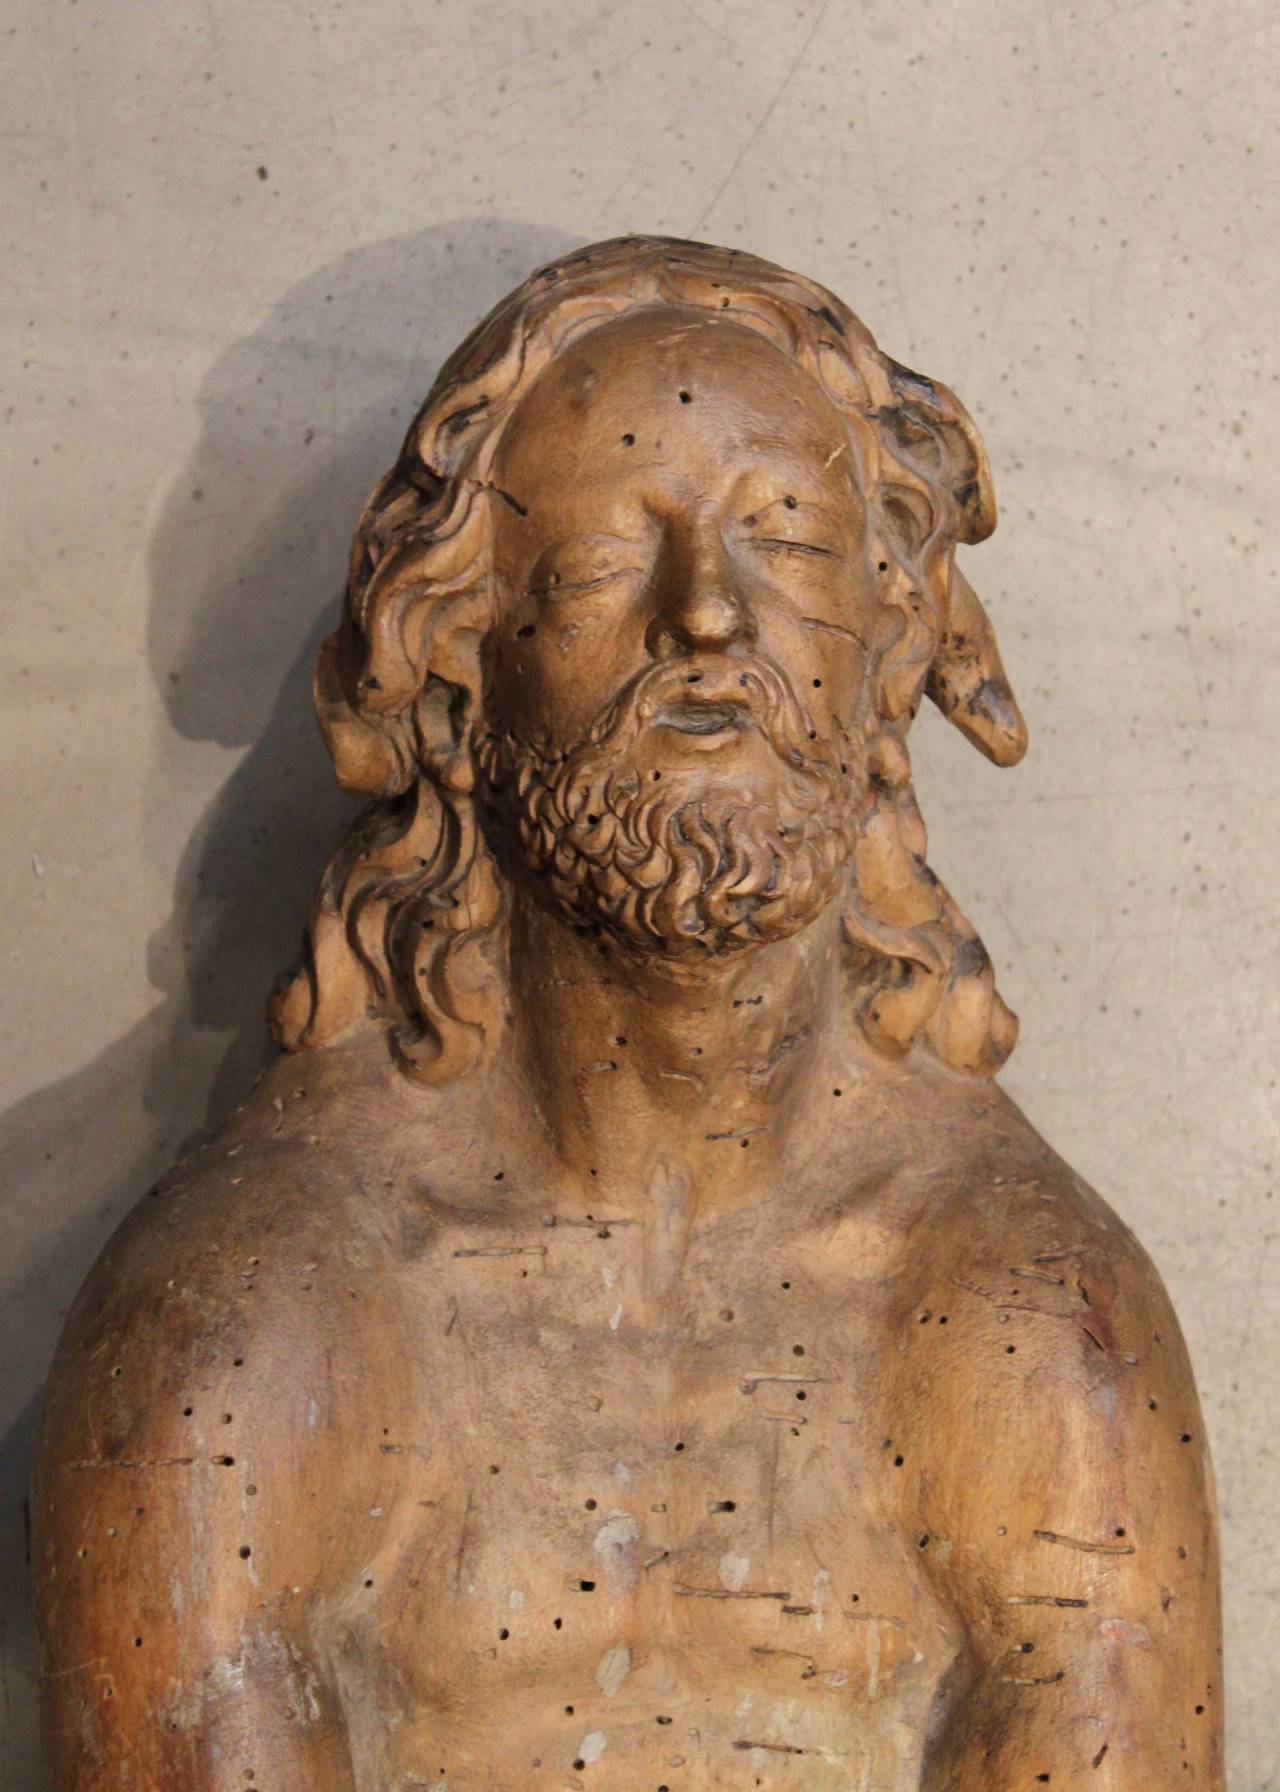 17th century medieval limewood carving of Christ. Likely a model of dead Christ after imagery discovered in the Turin Shroud. Beautifully carved and well-preserved with minor losses constant with age. 

Measures: 29